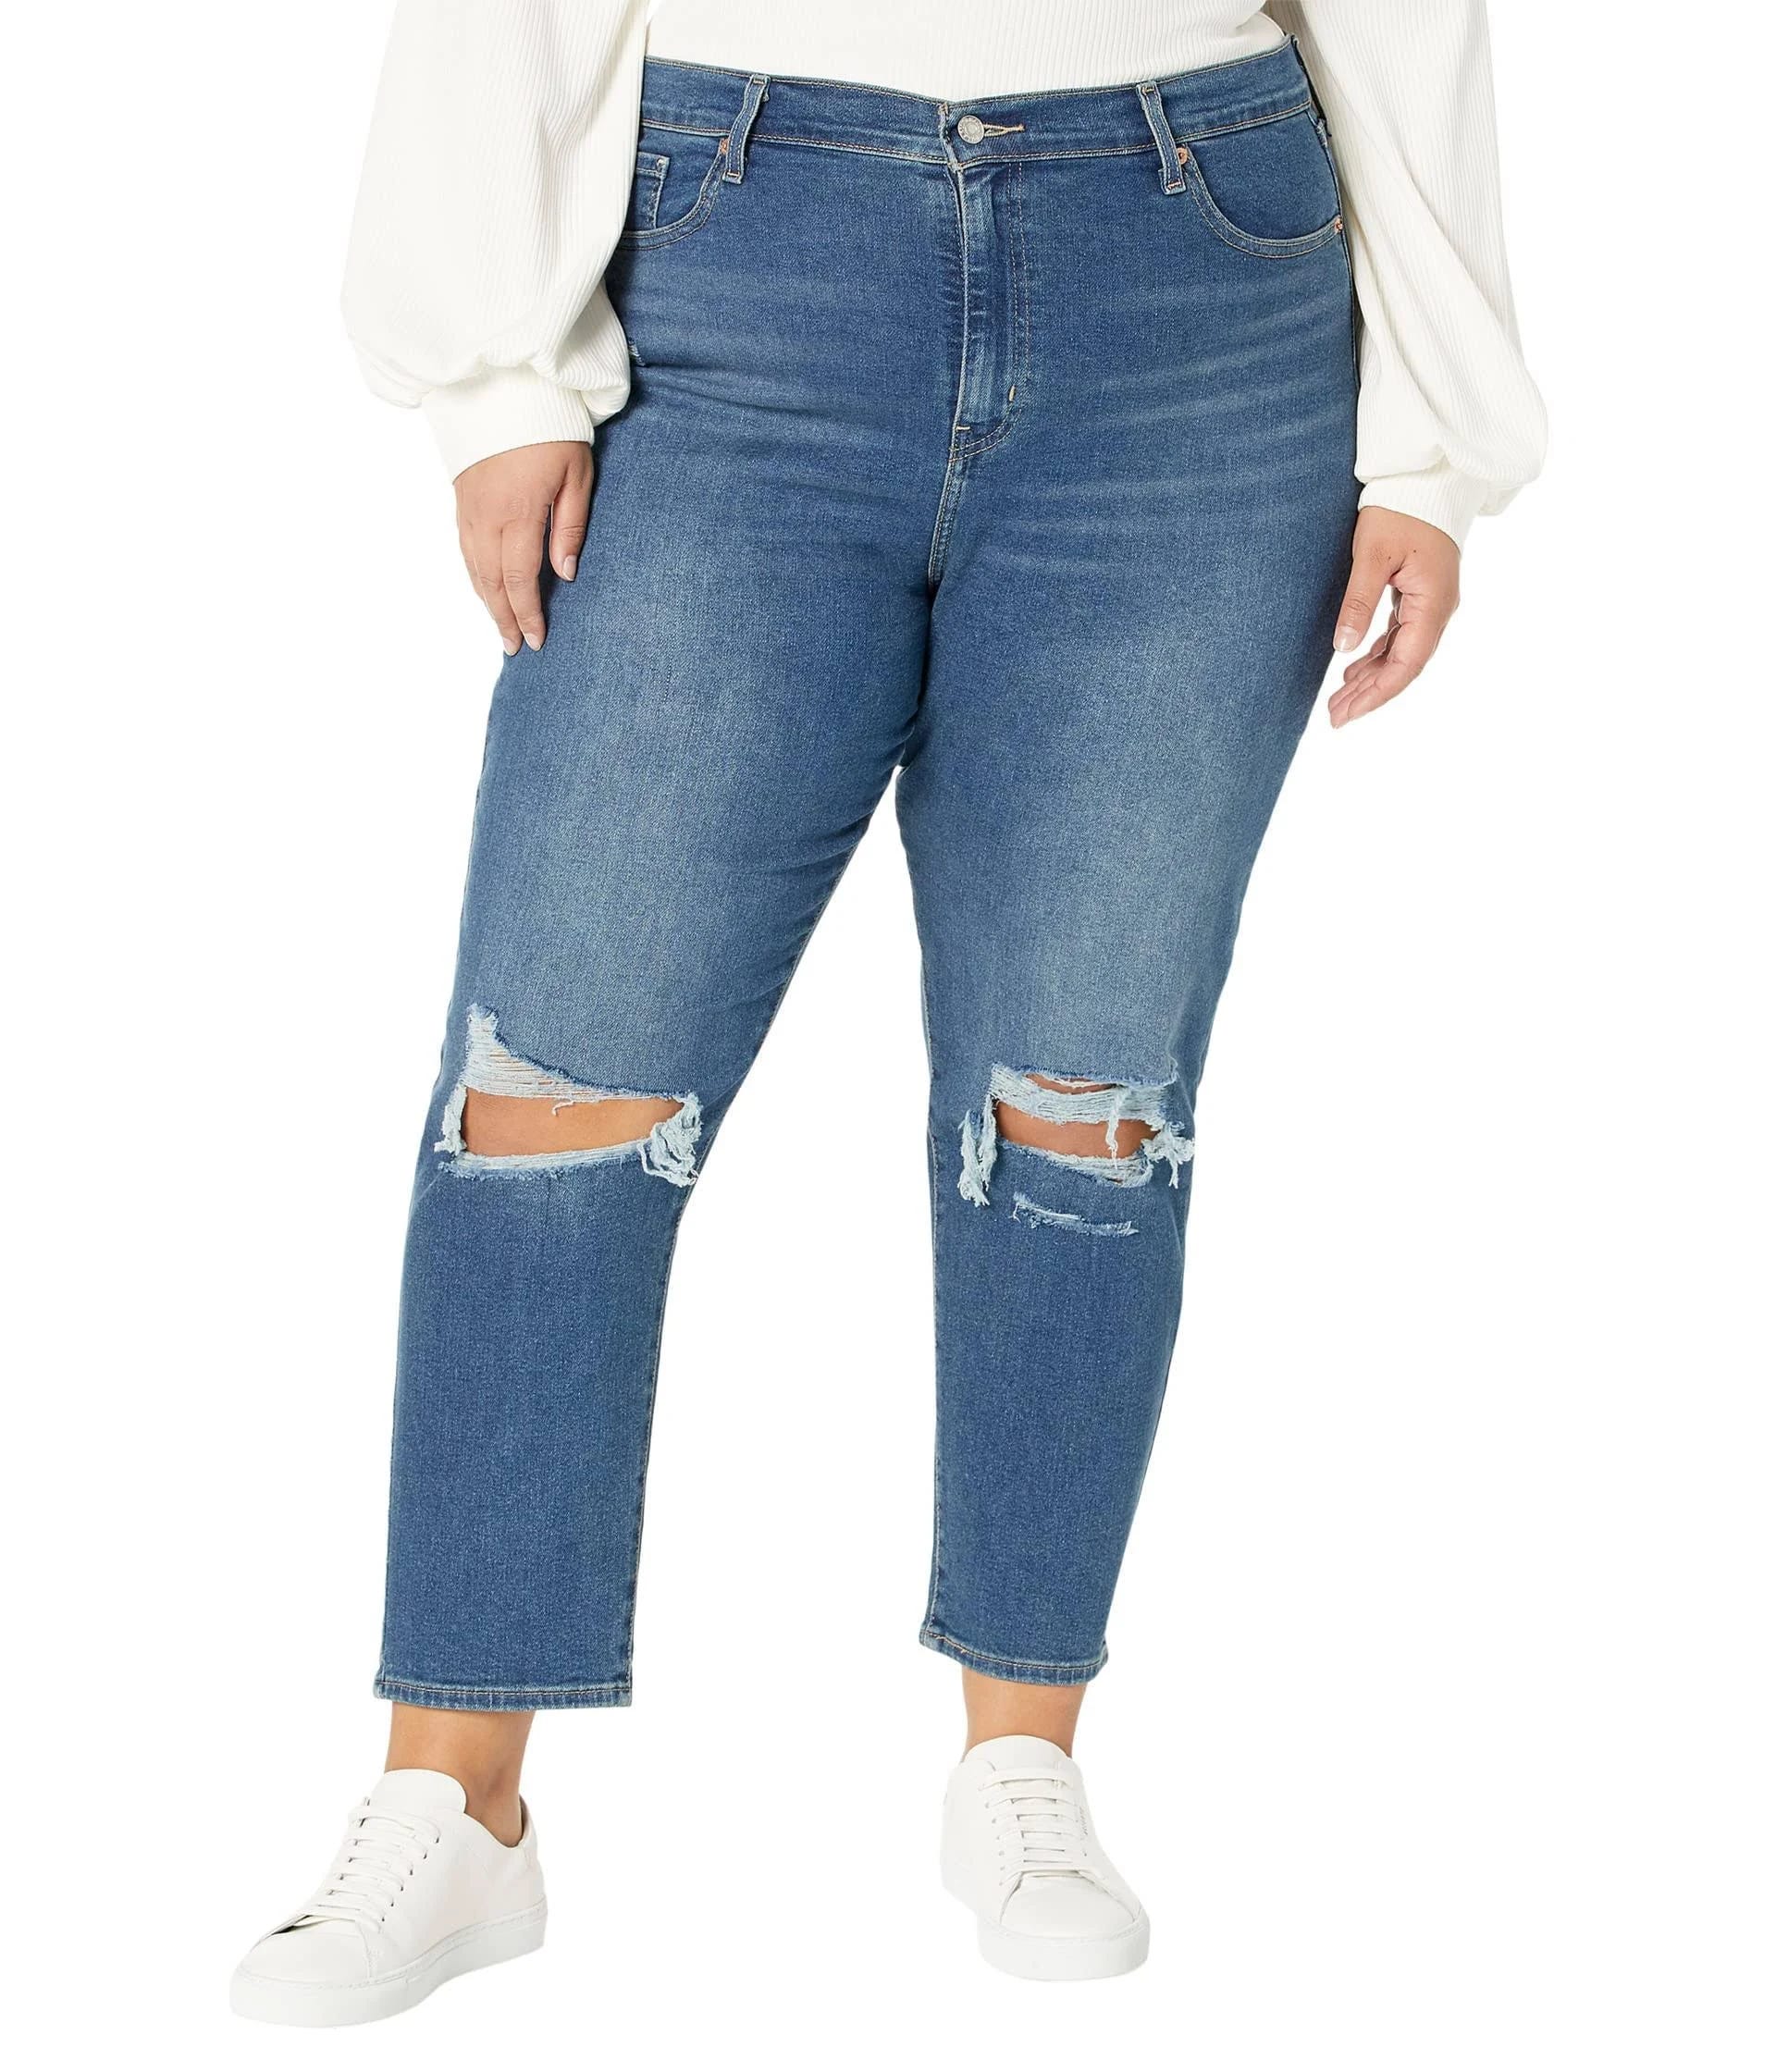 Vintage Mom Jeans by Levi Strauss - High Waist & Tapered | Image